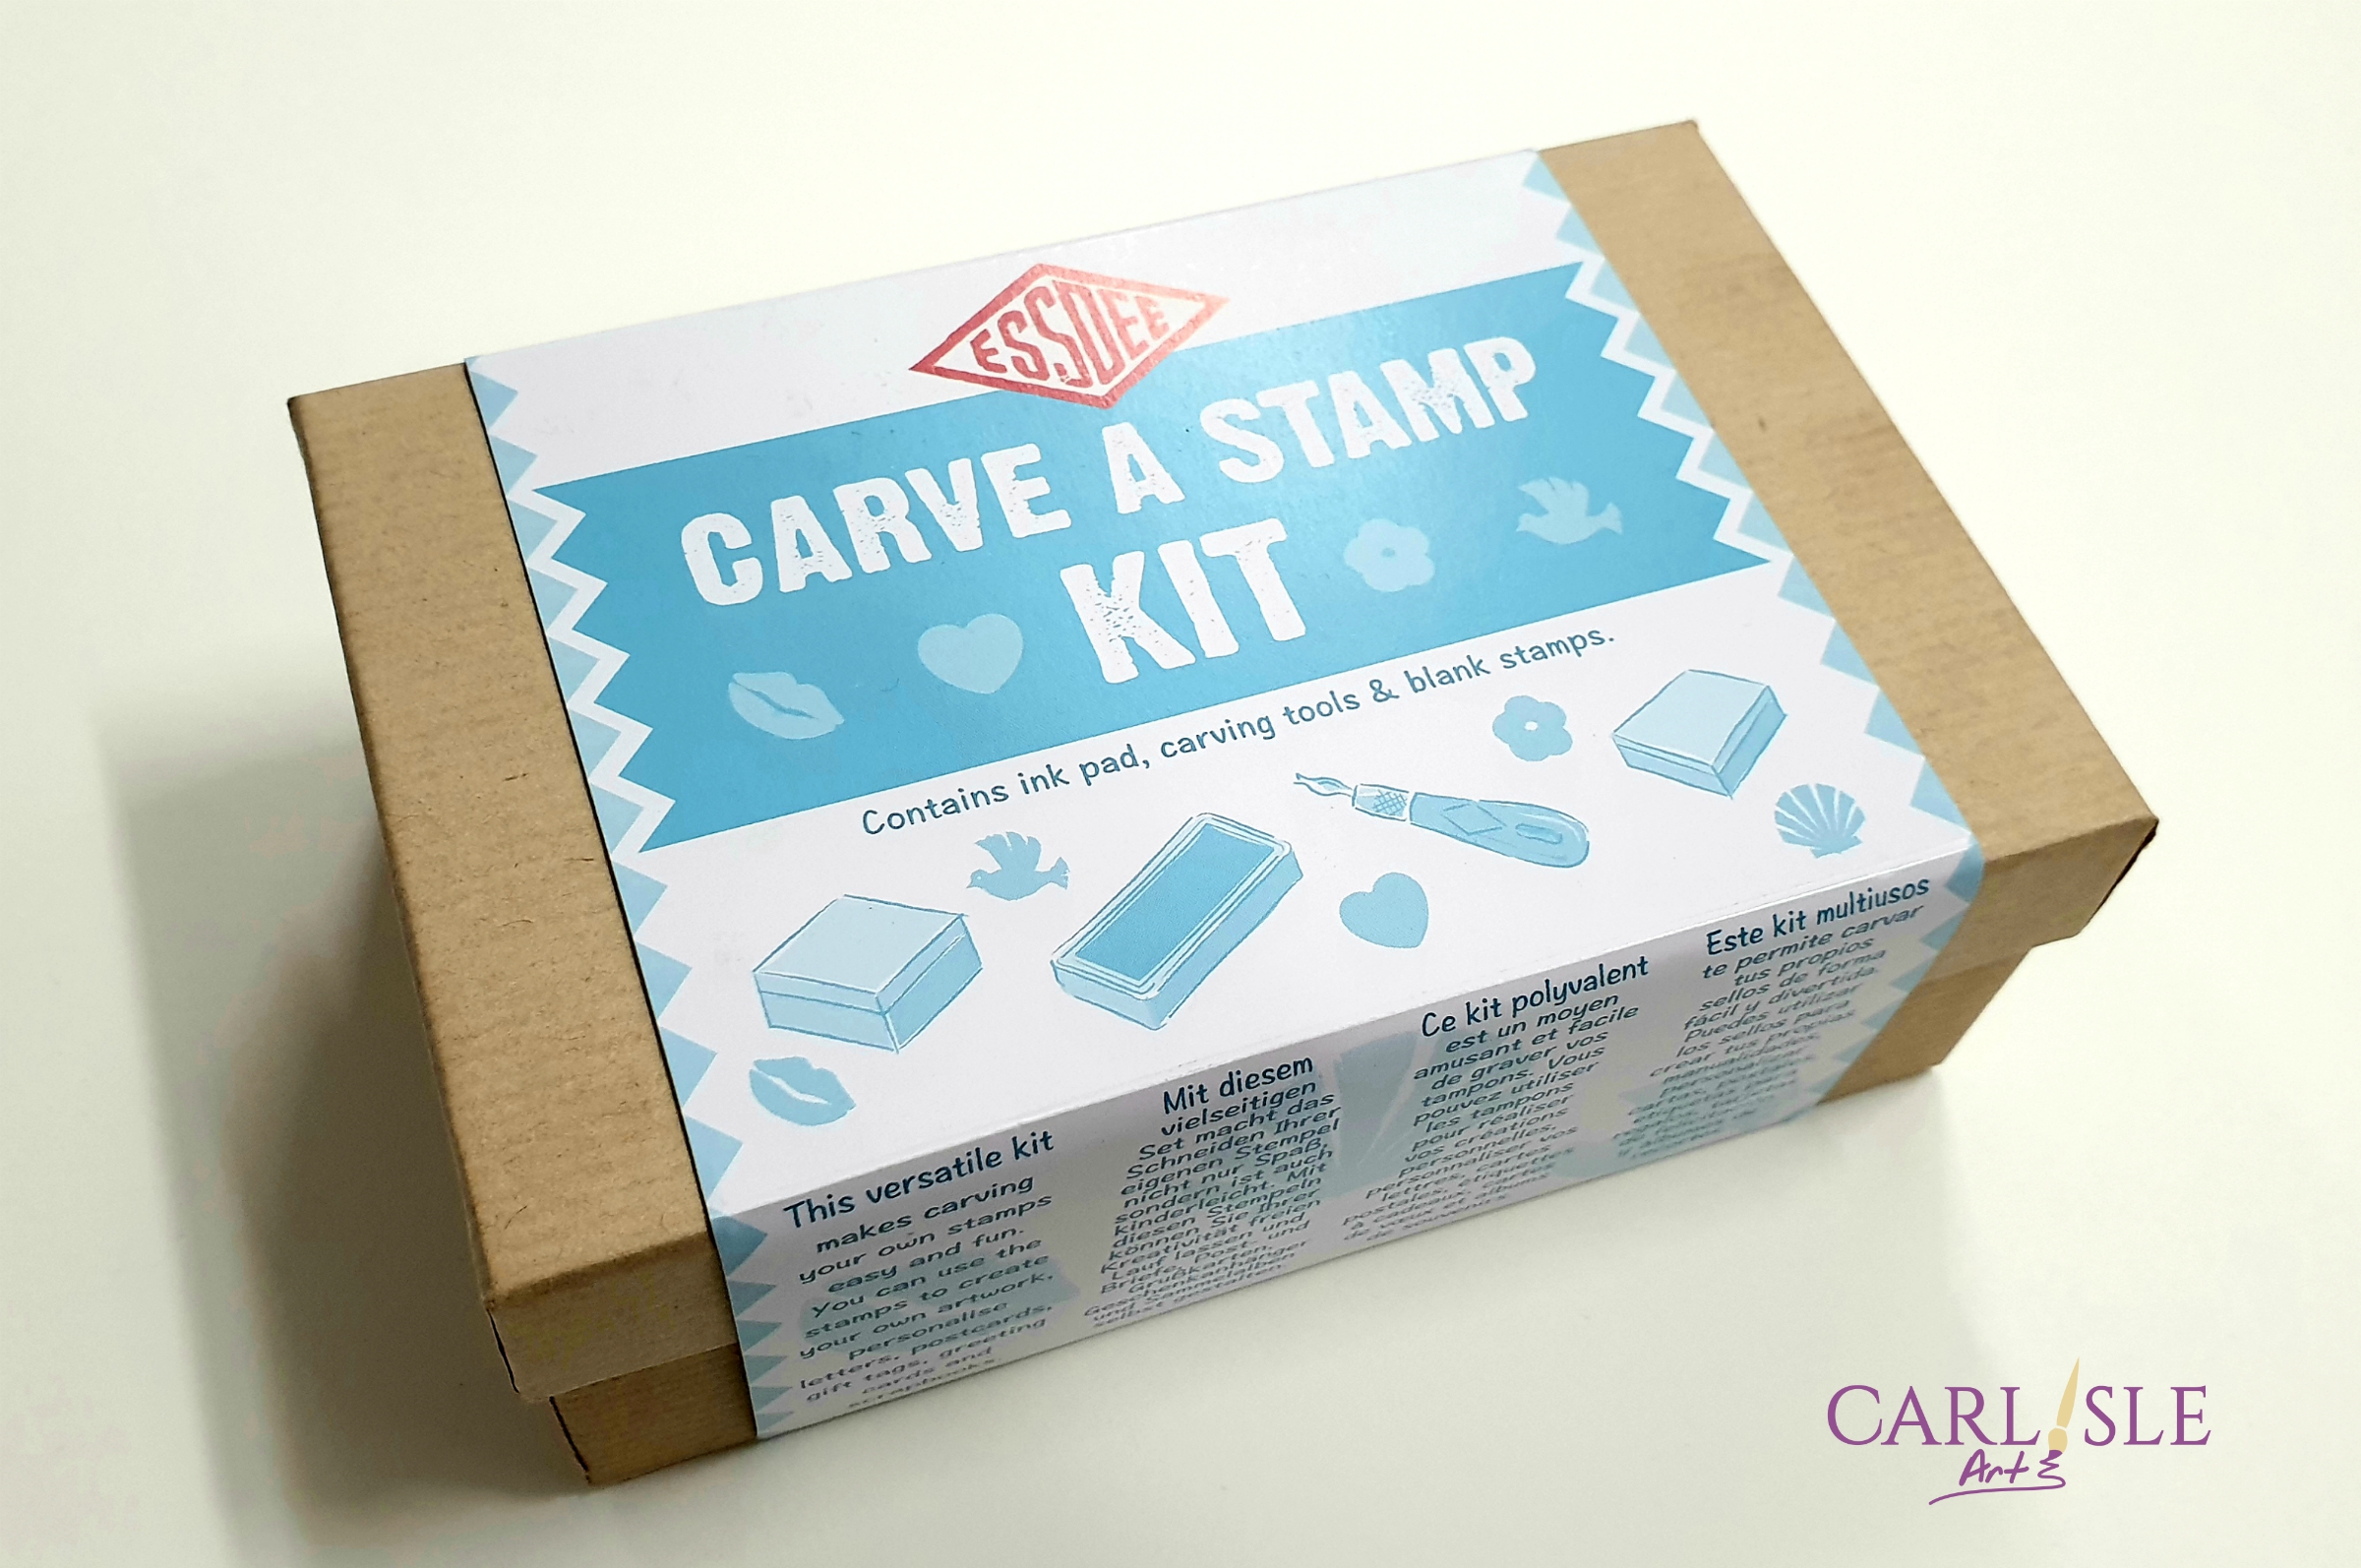 Essdee Stamp Carving Kit Review 